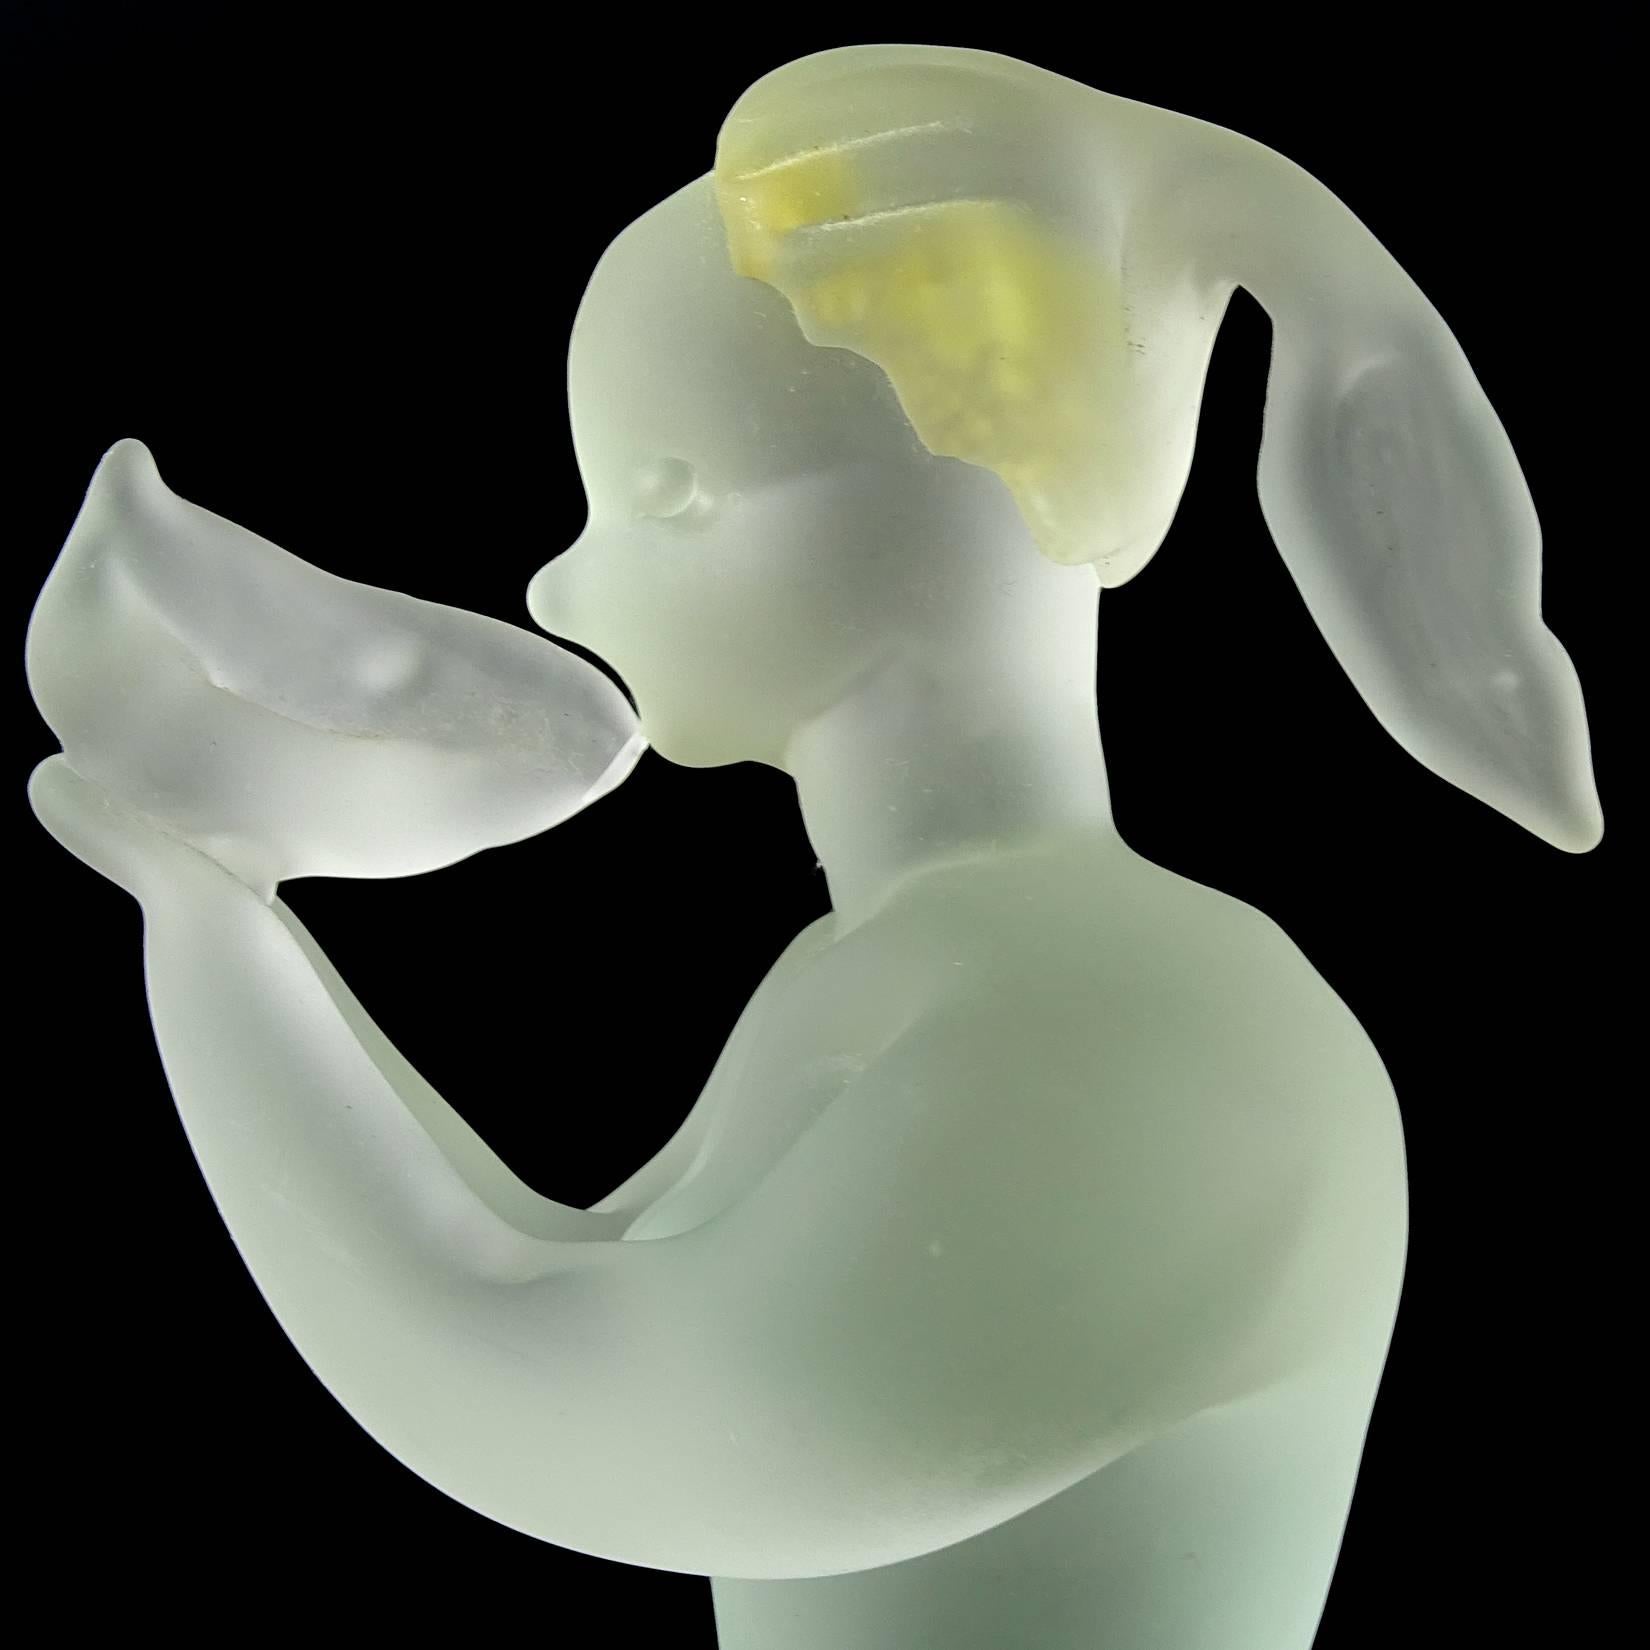 Hand-Crafted Murano Green Sommerso Satin Surface Italian Art Glass Mermaid Sculpture